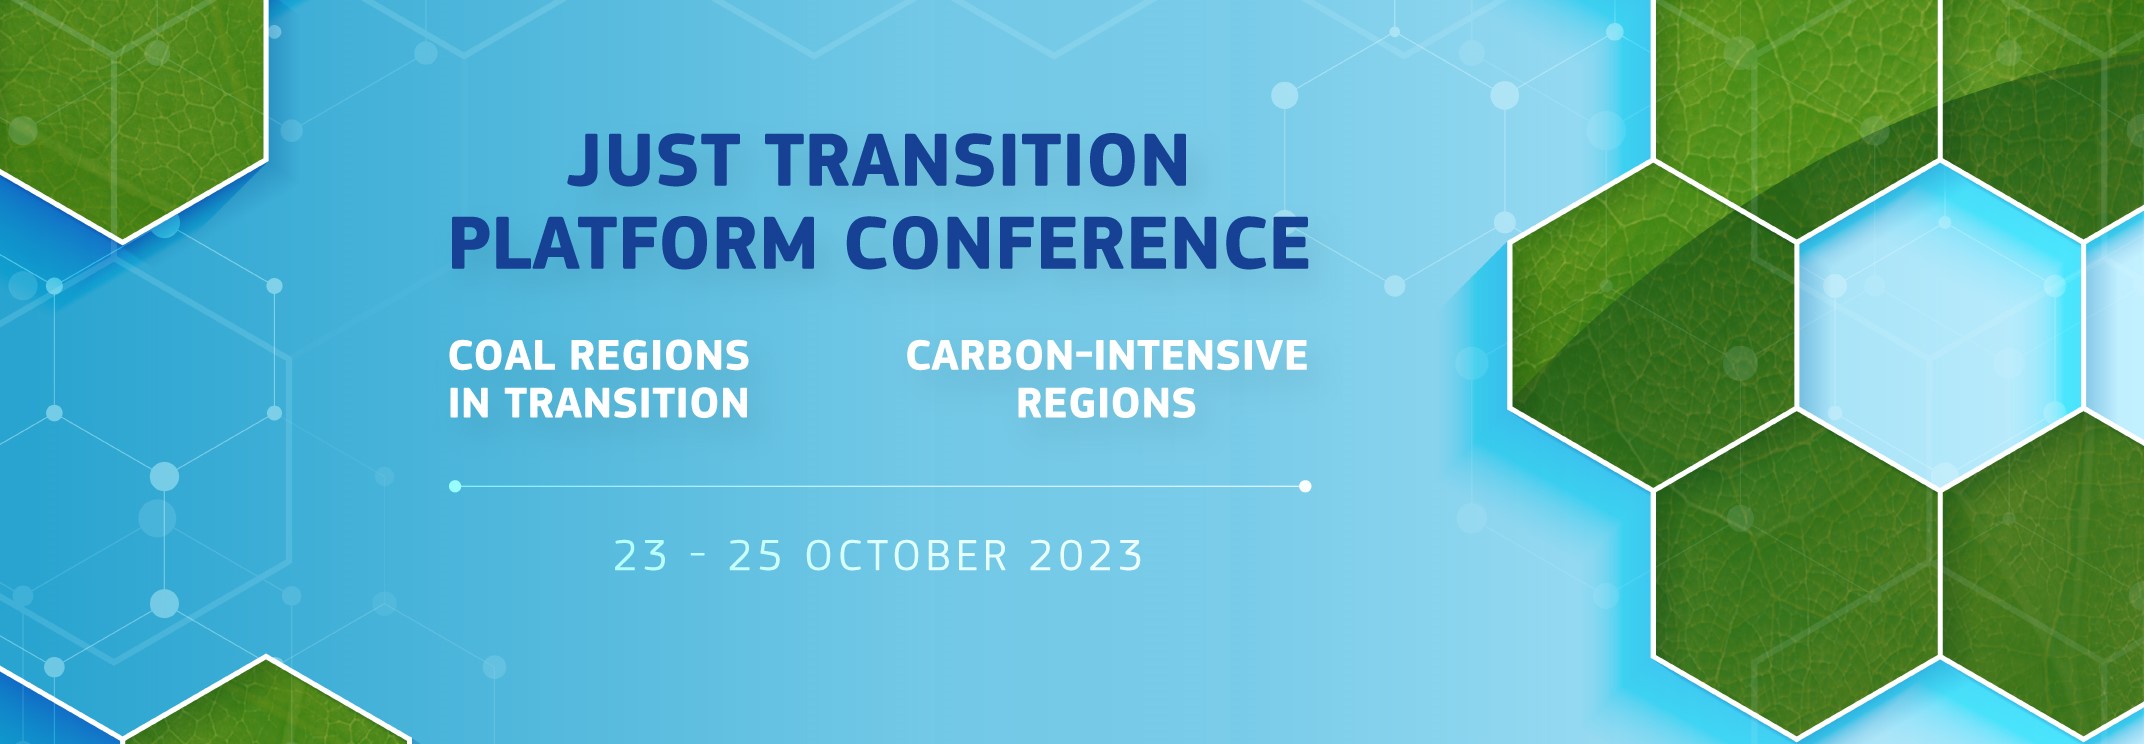 Just Transition Platform Conference meets in Brussels and online to discuss how to make the green transition work for all